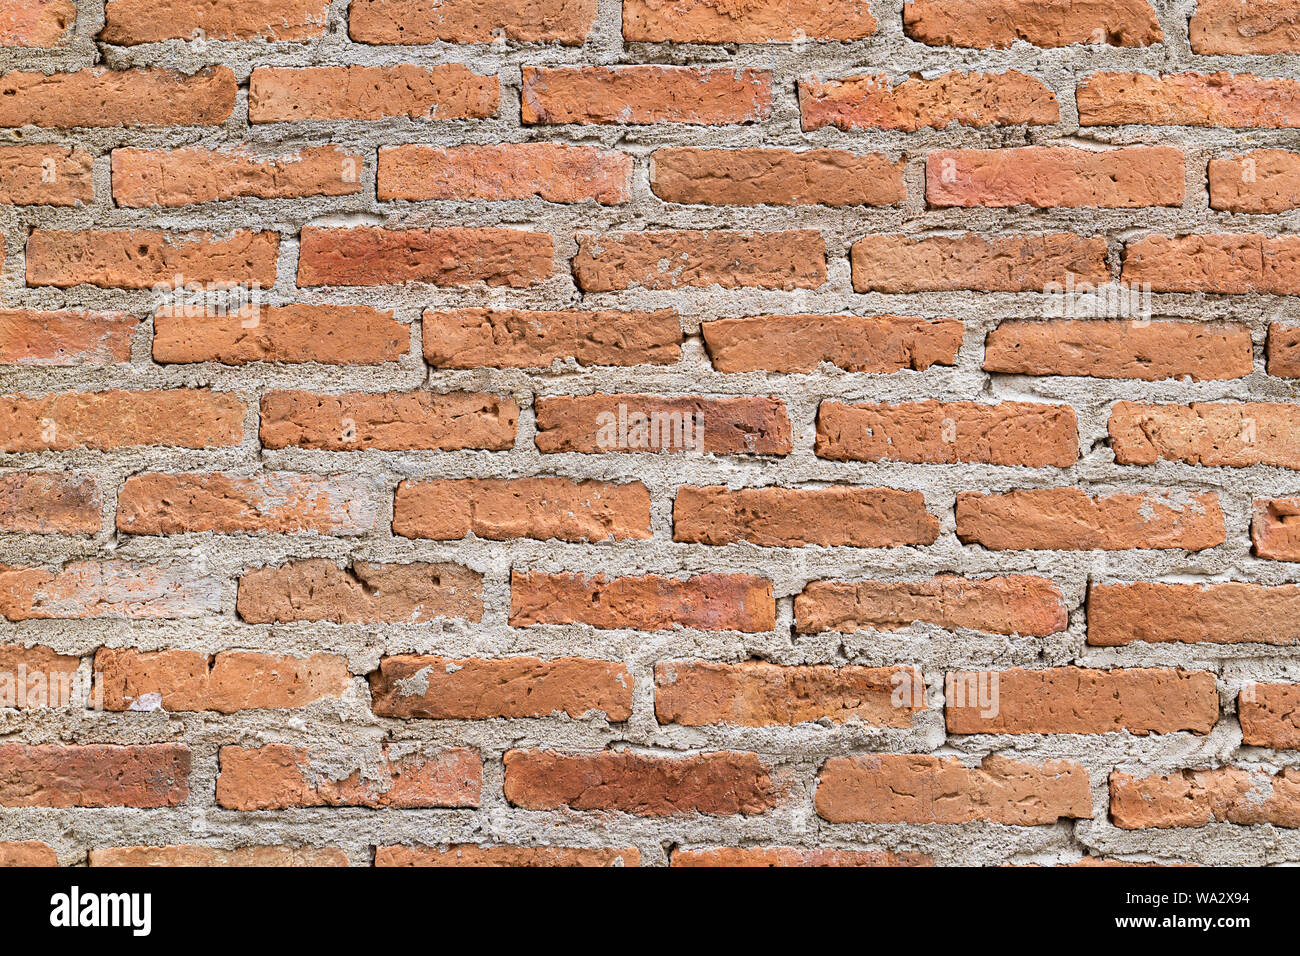 Background Of Old Stone Brick Wall Detail Rock Interior